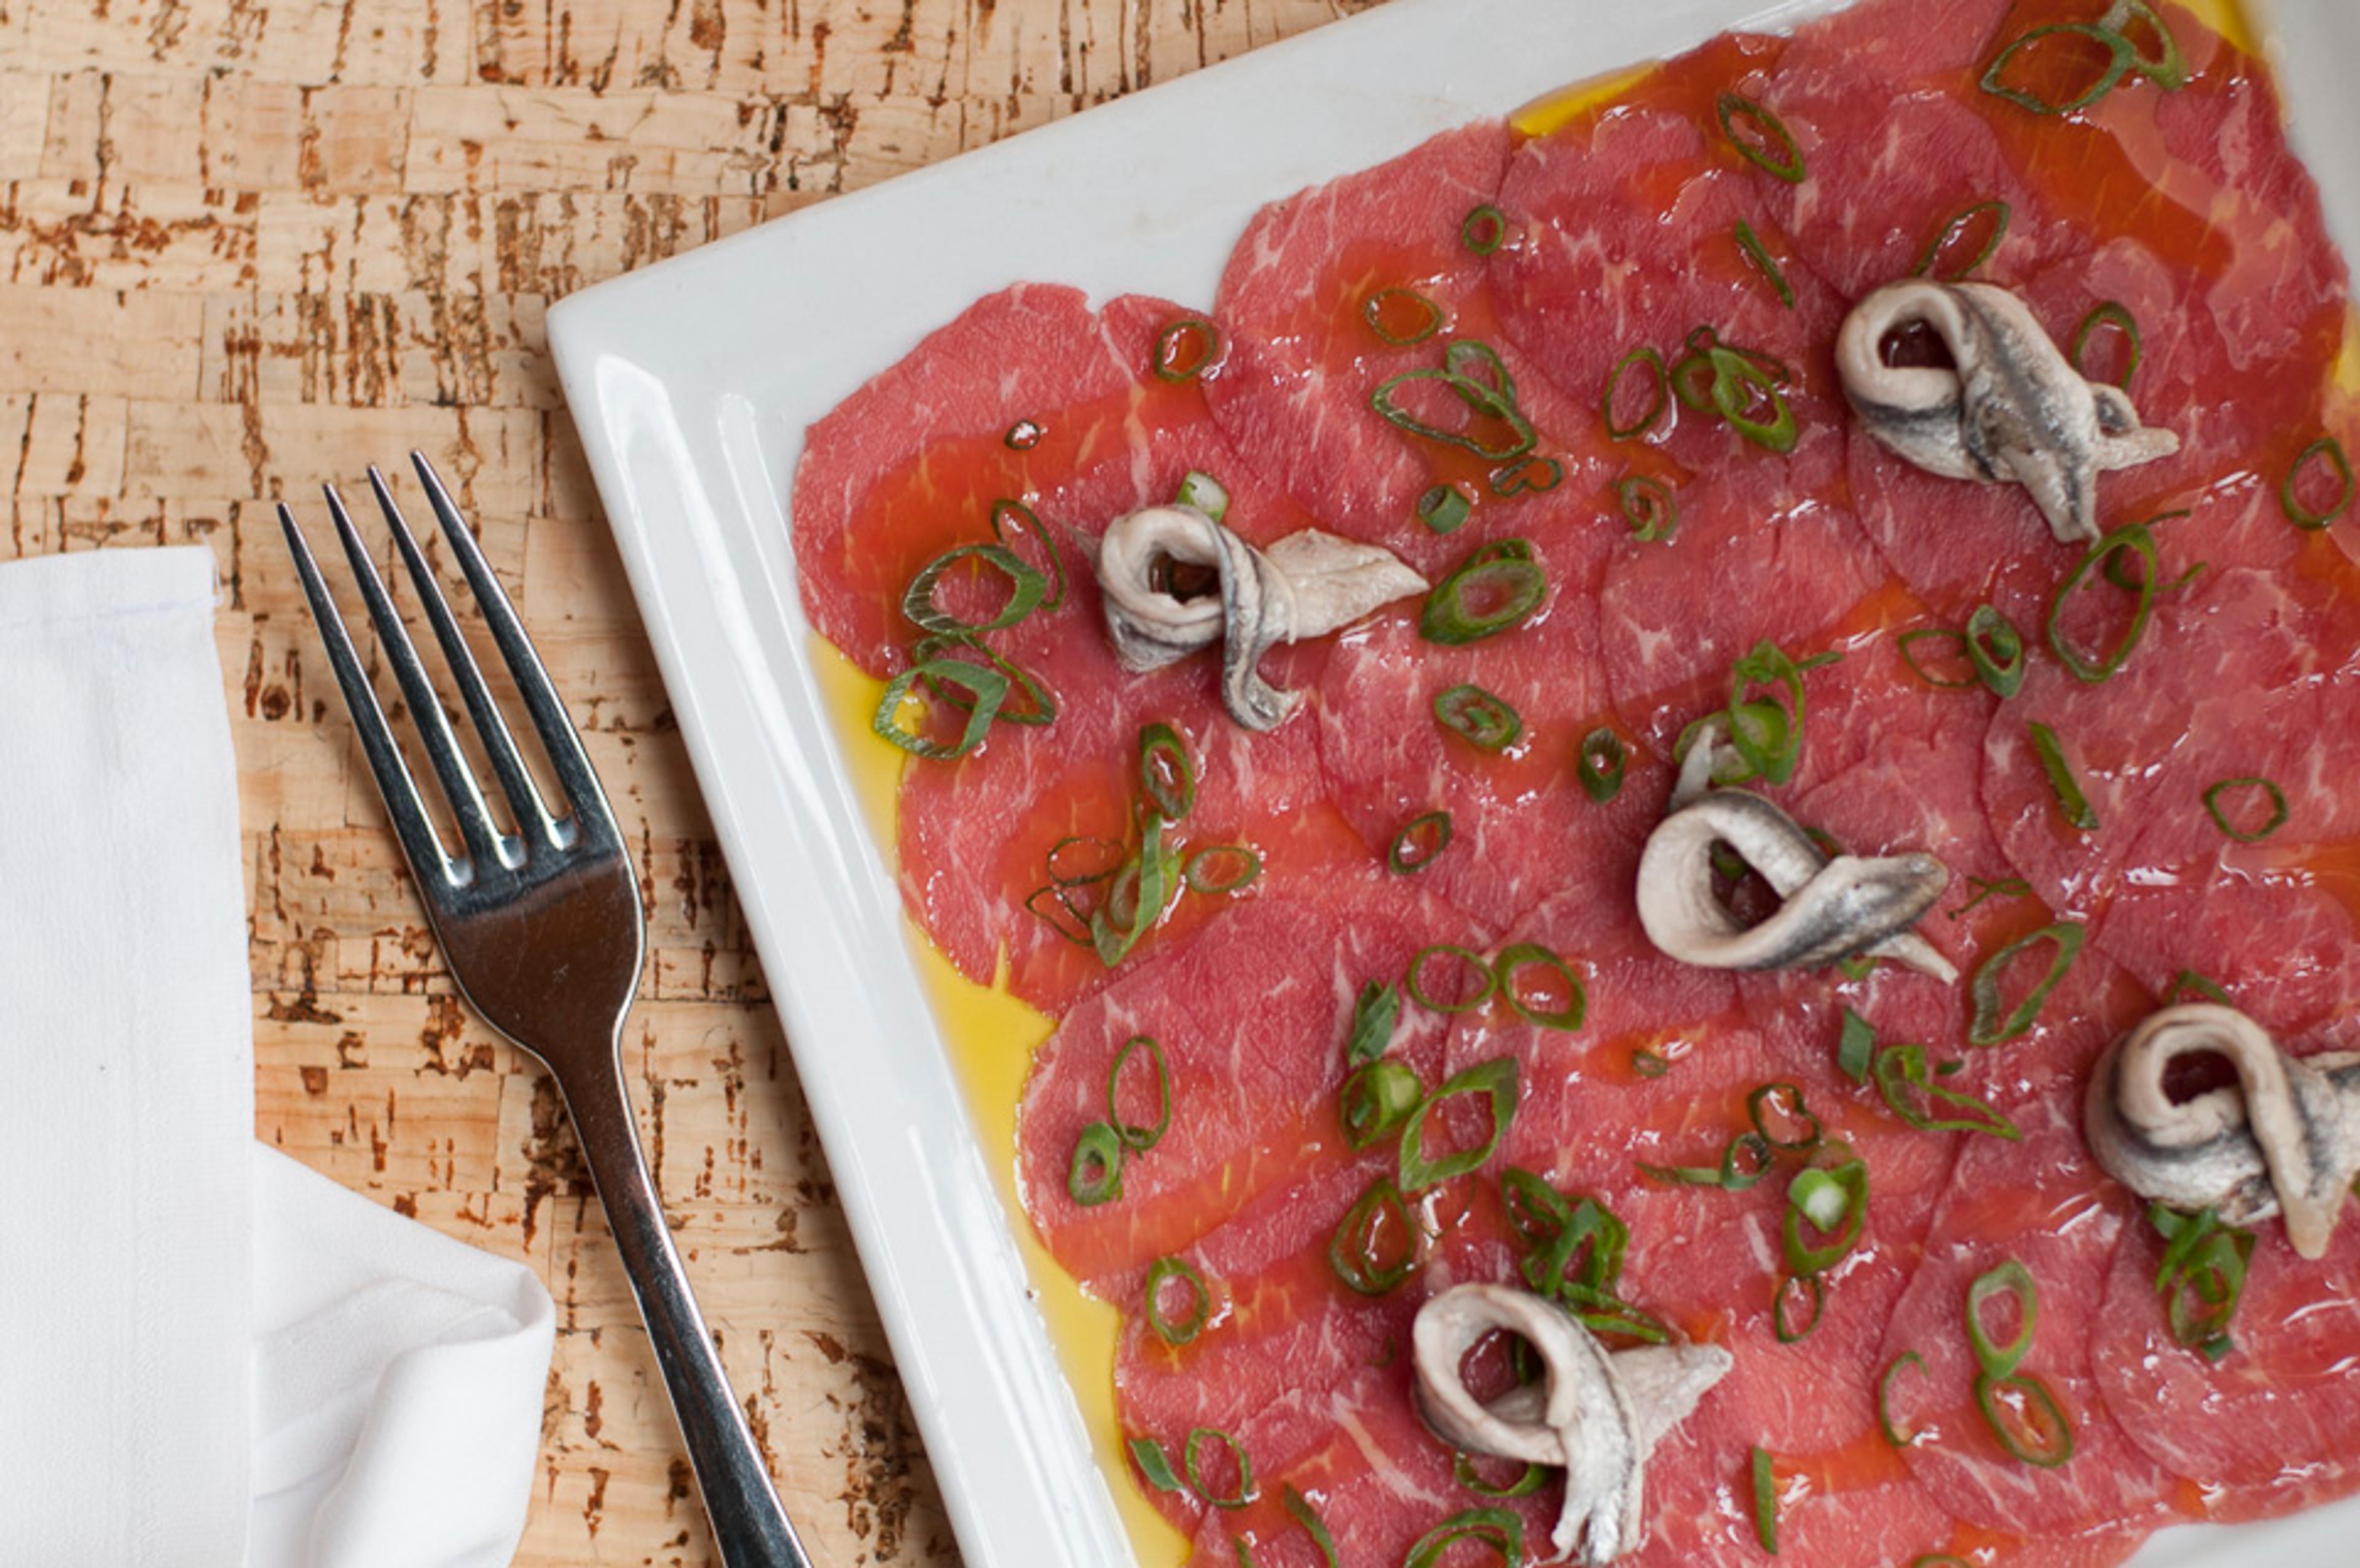 Beef carpaccio with pickled white anchovies